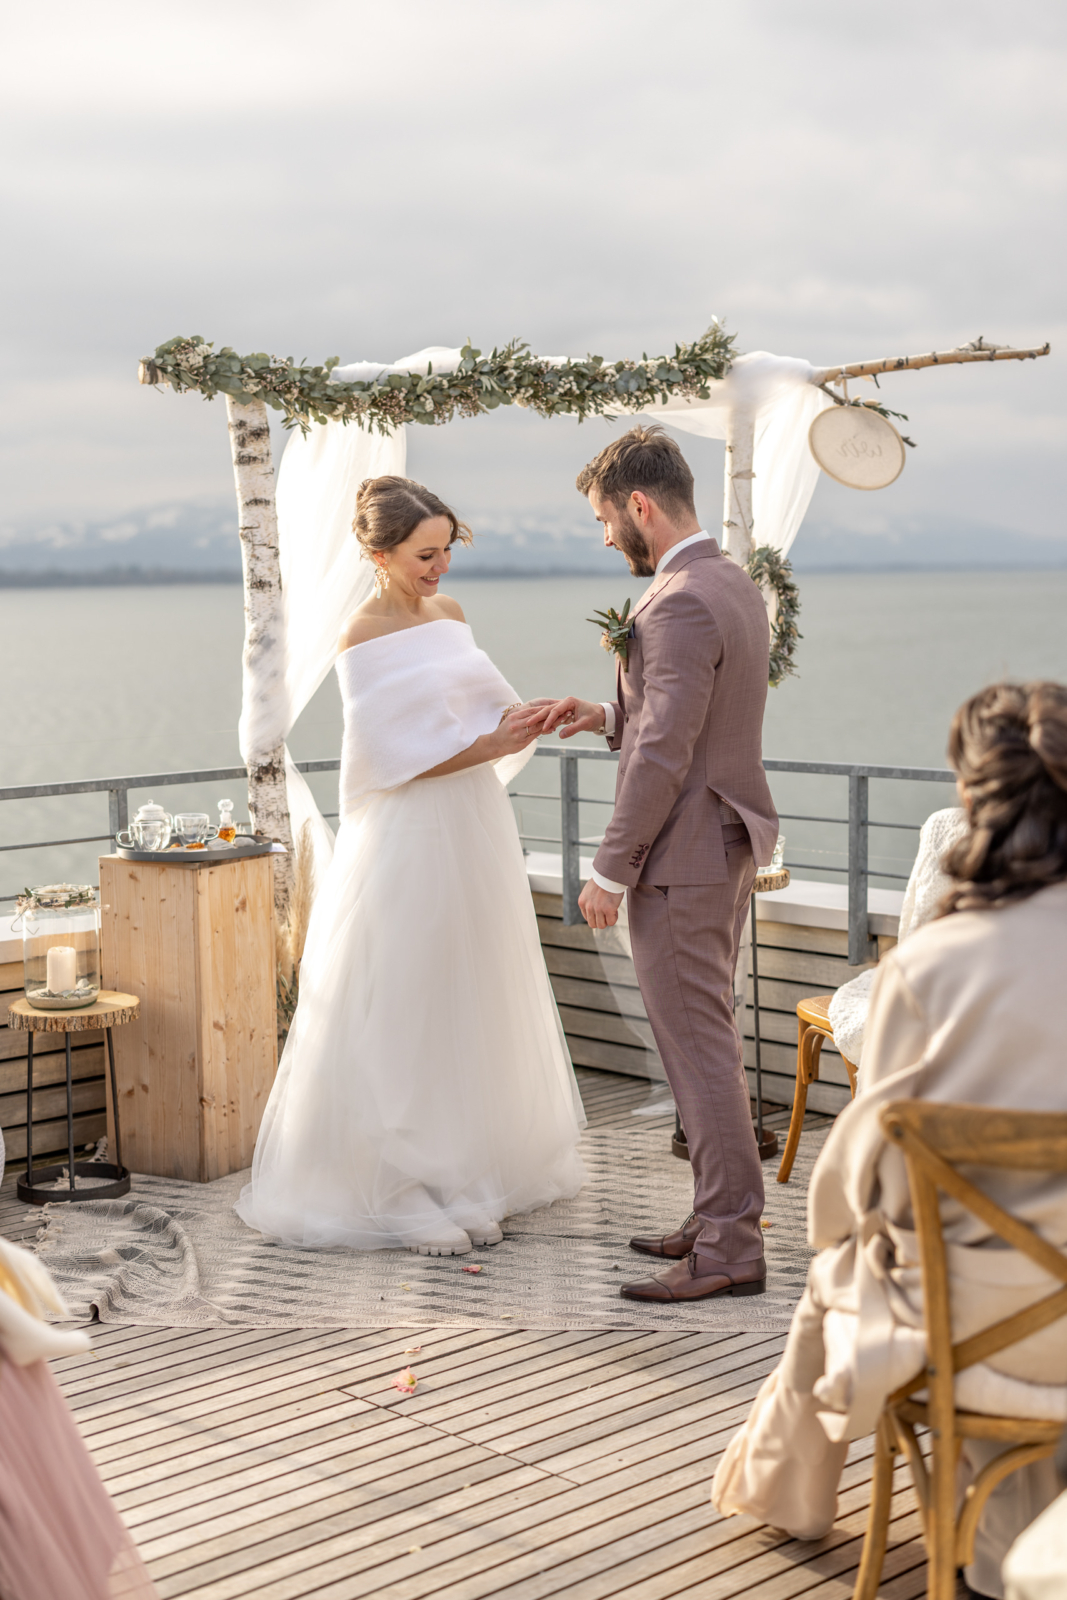 ring exchange at the wedding ceremony by the lake of constance